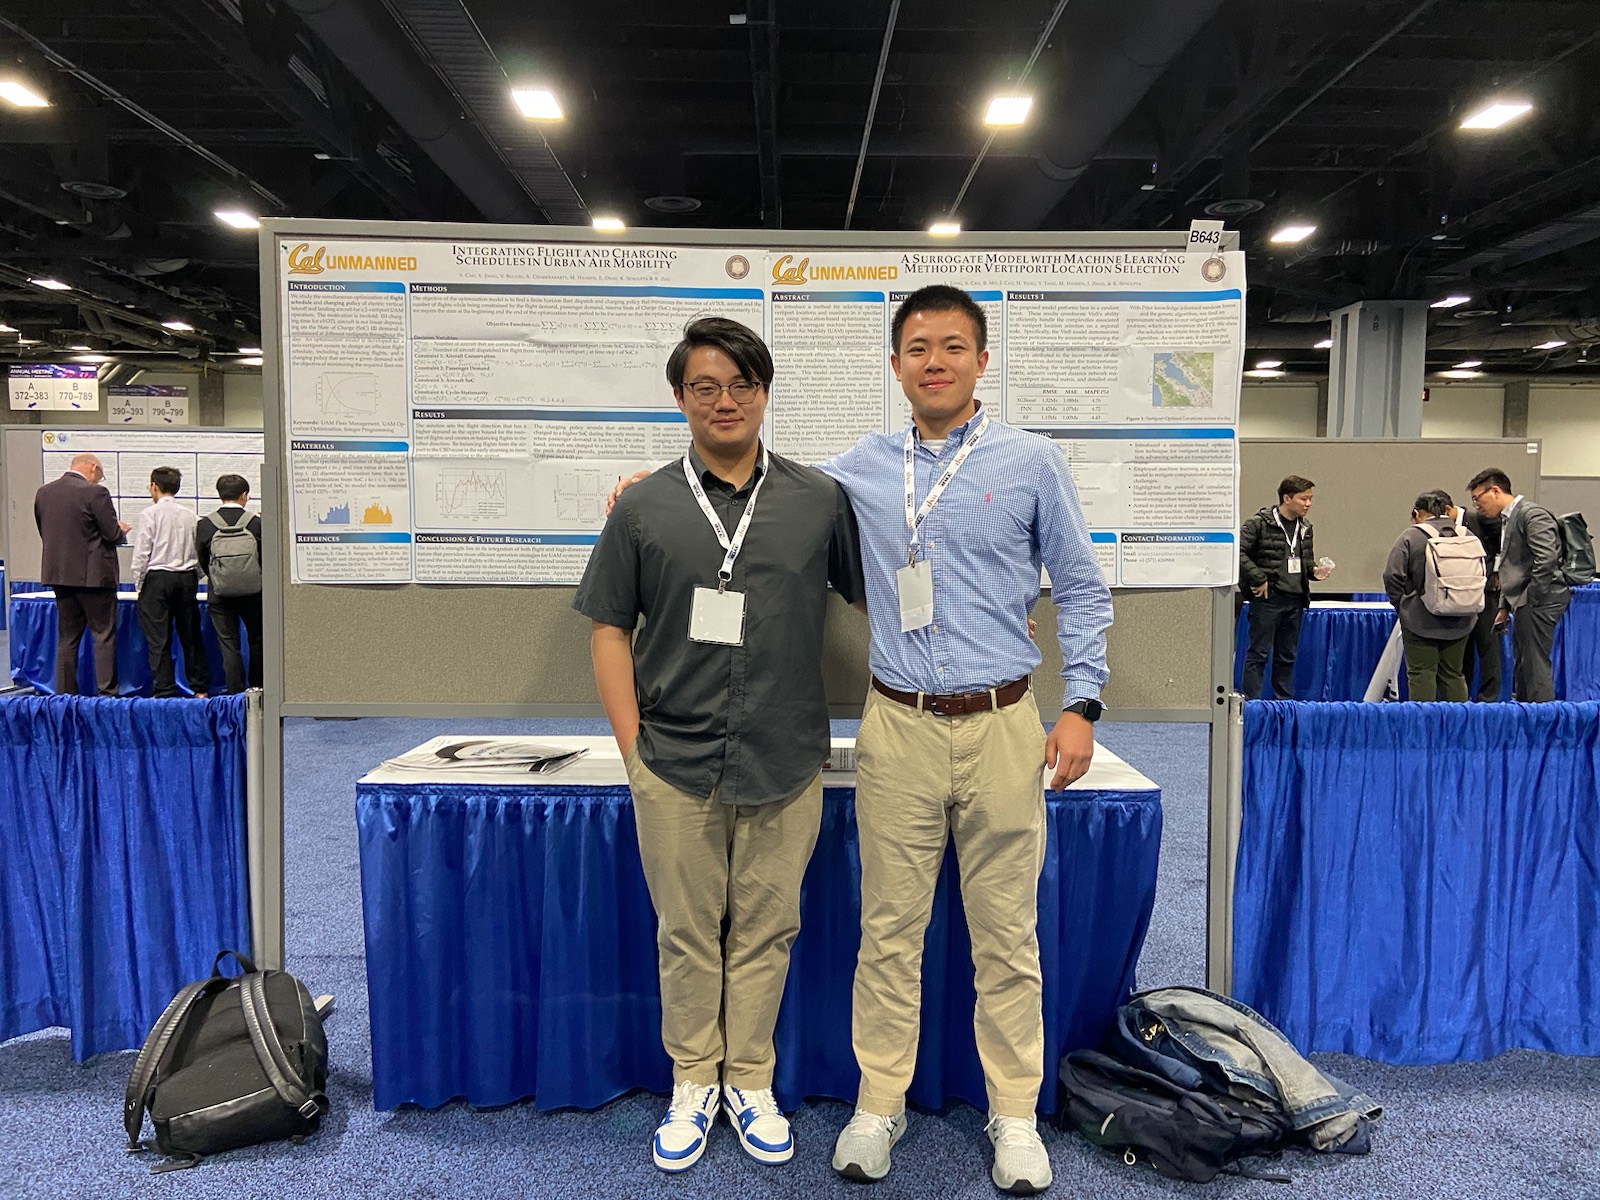 doctoral students Xuan Jiang and Albert Cao present their poster on Simulation-based Optimization for #Vertiport Location Selection at Transportation Research Board Annual Meeting